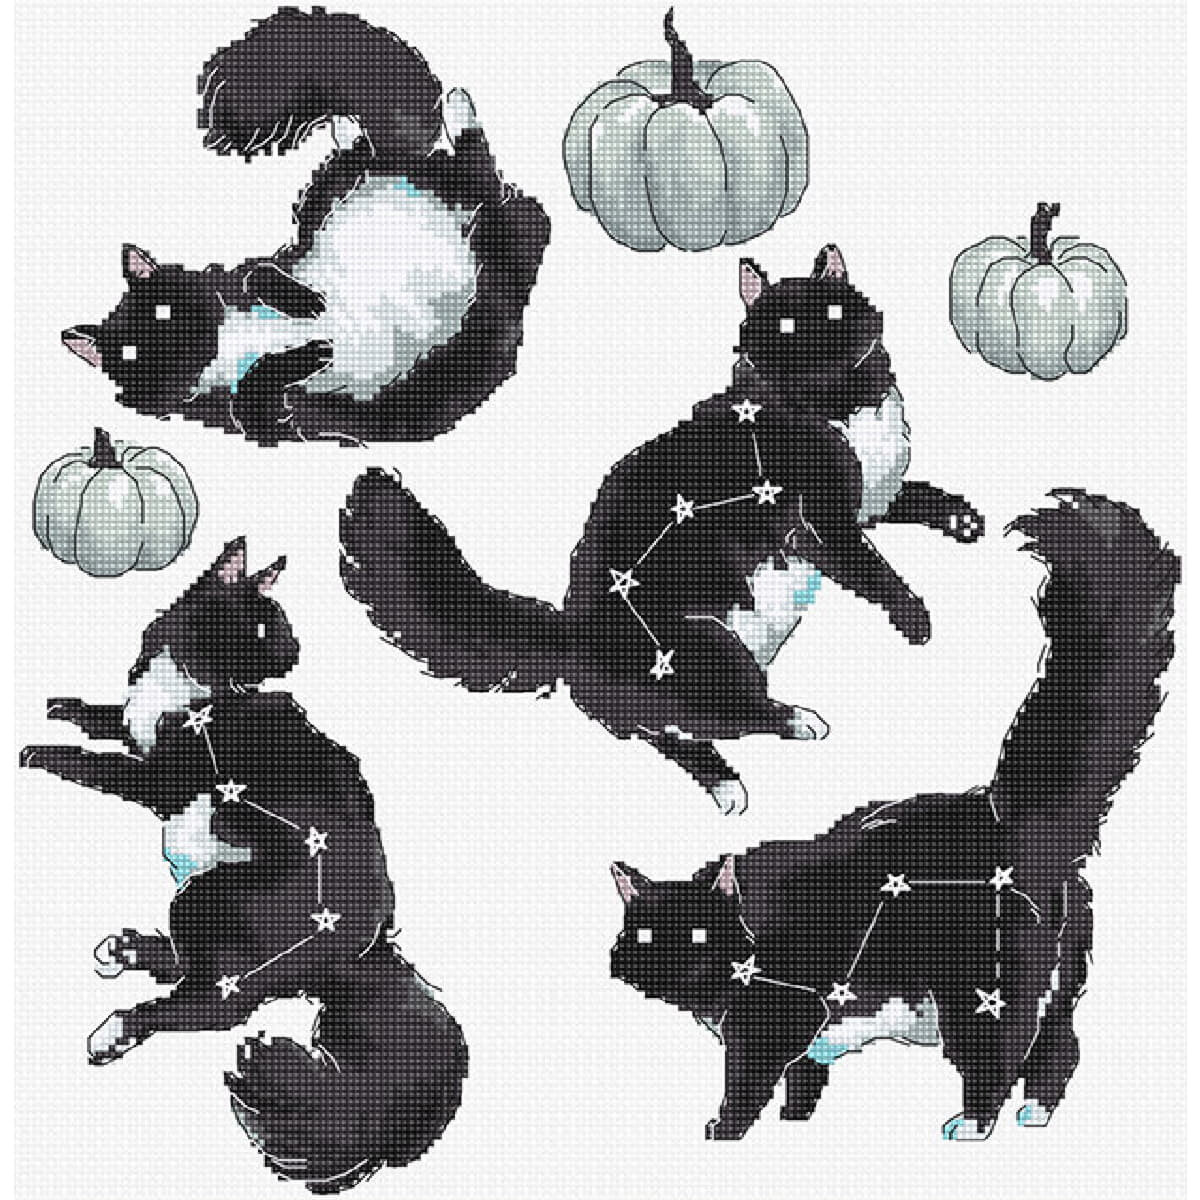 One illustration shows four black cats in various playful...